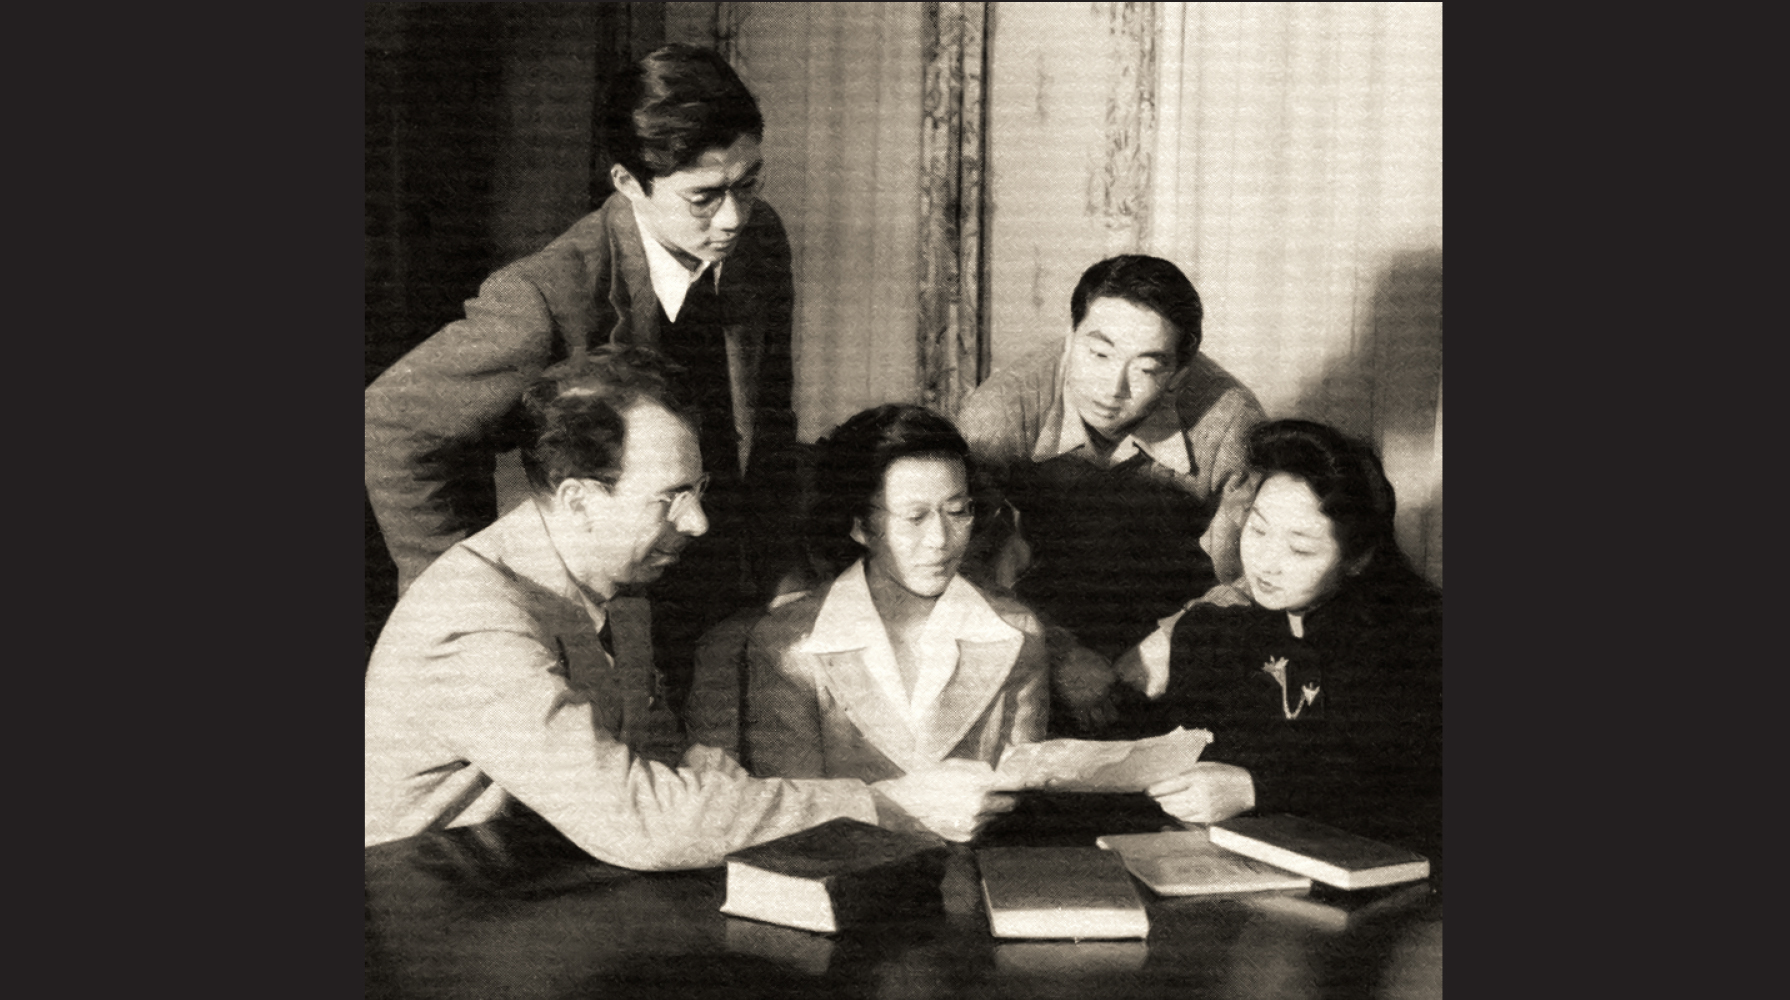 Professor of Chemistry L. Reed Brantley with Oxy's Japanese American students in 1942.